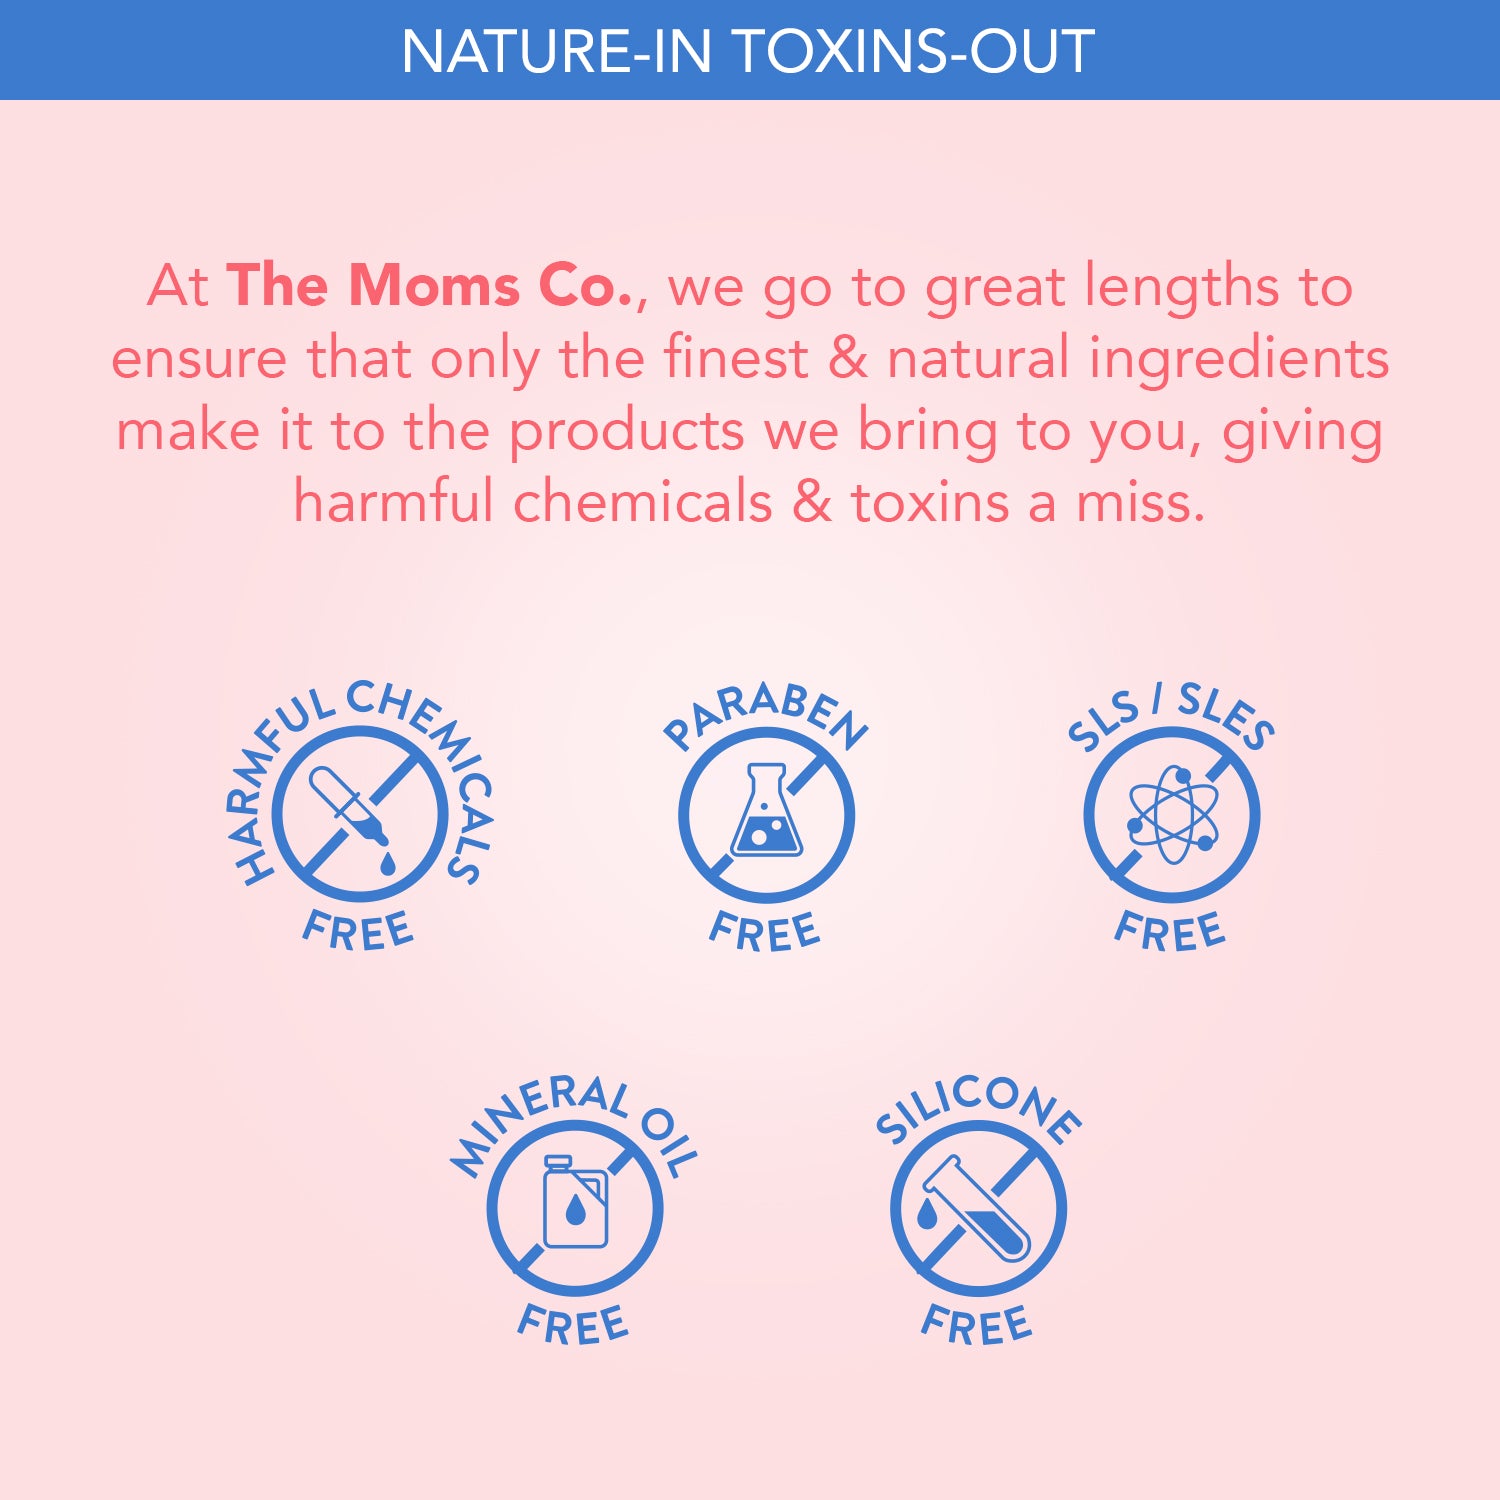 The Moms Co. Waterproof SPF 50+ Natural Mineral Based Baby Sunscreen - for UV-A & UV-B Protection with Pongamia Glabra Seed, Red Raspberry Seed and Organic Carrot Seed Oil - 100ml